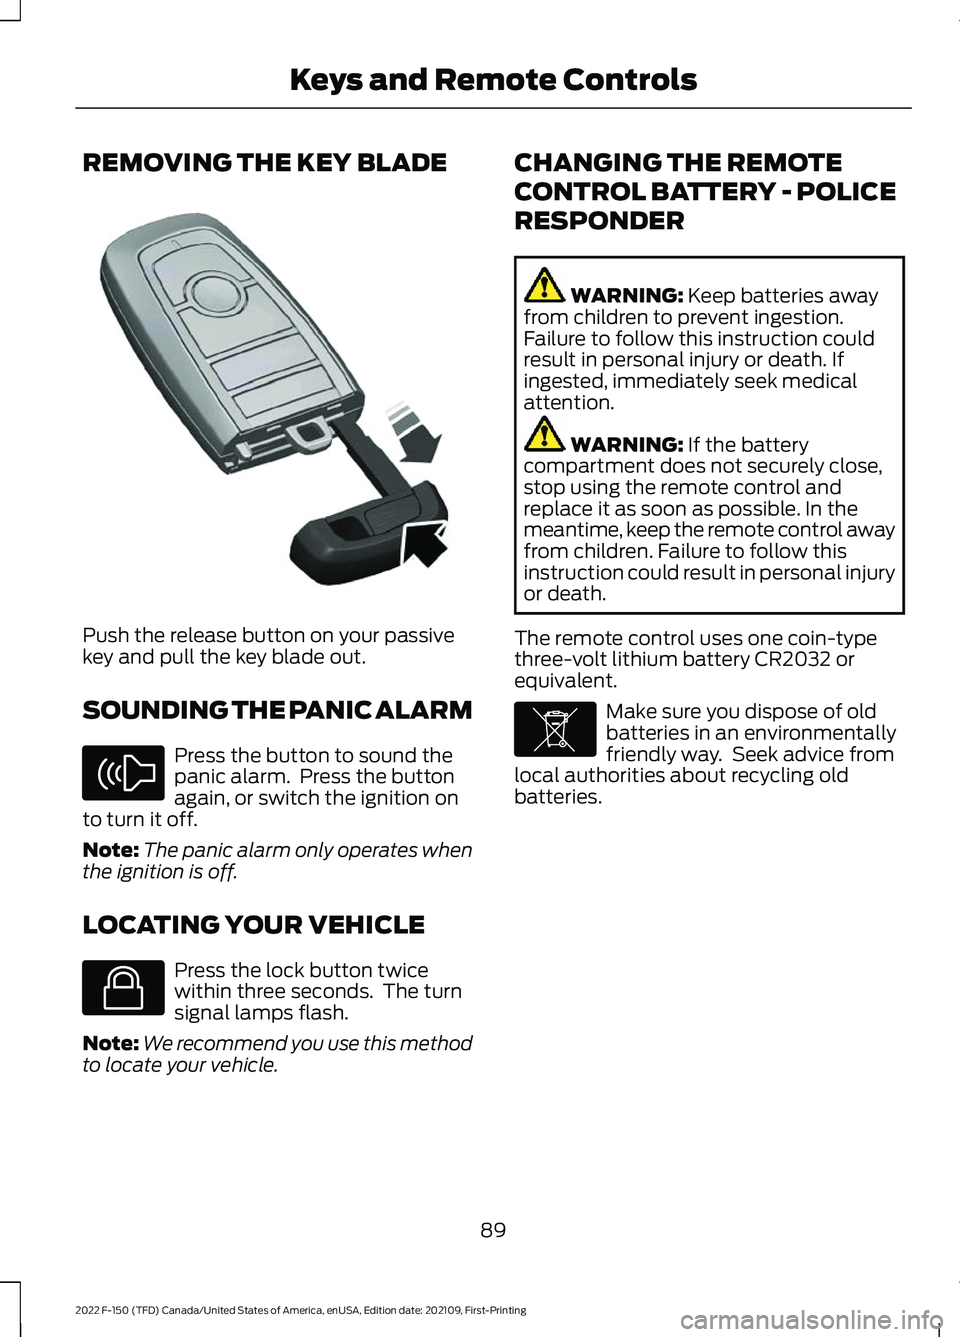 FORD F-150 2022 Owners Guide REMOVING THE KEY BLADE
Push the release button on your passive
key and pull the key blade out.
SOUNDING THE PANIC ALARM
Press the button to sound the
panic alarm.  Press the button
again, or switch th